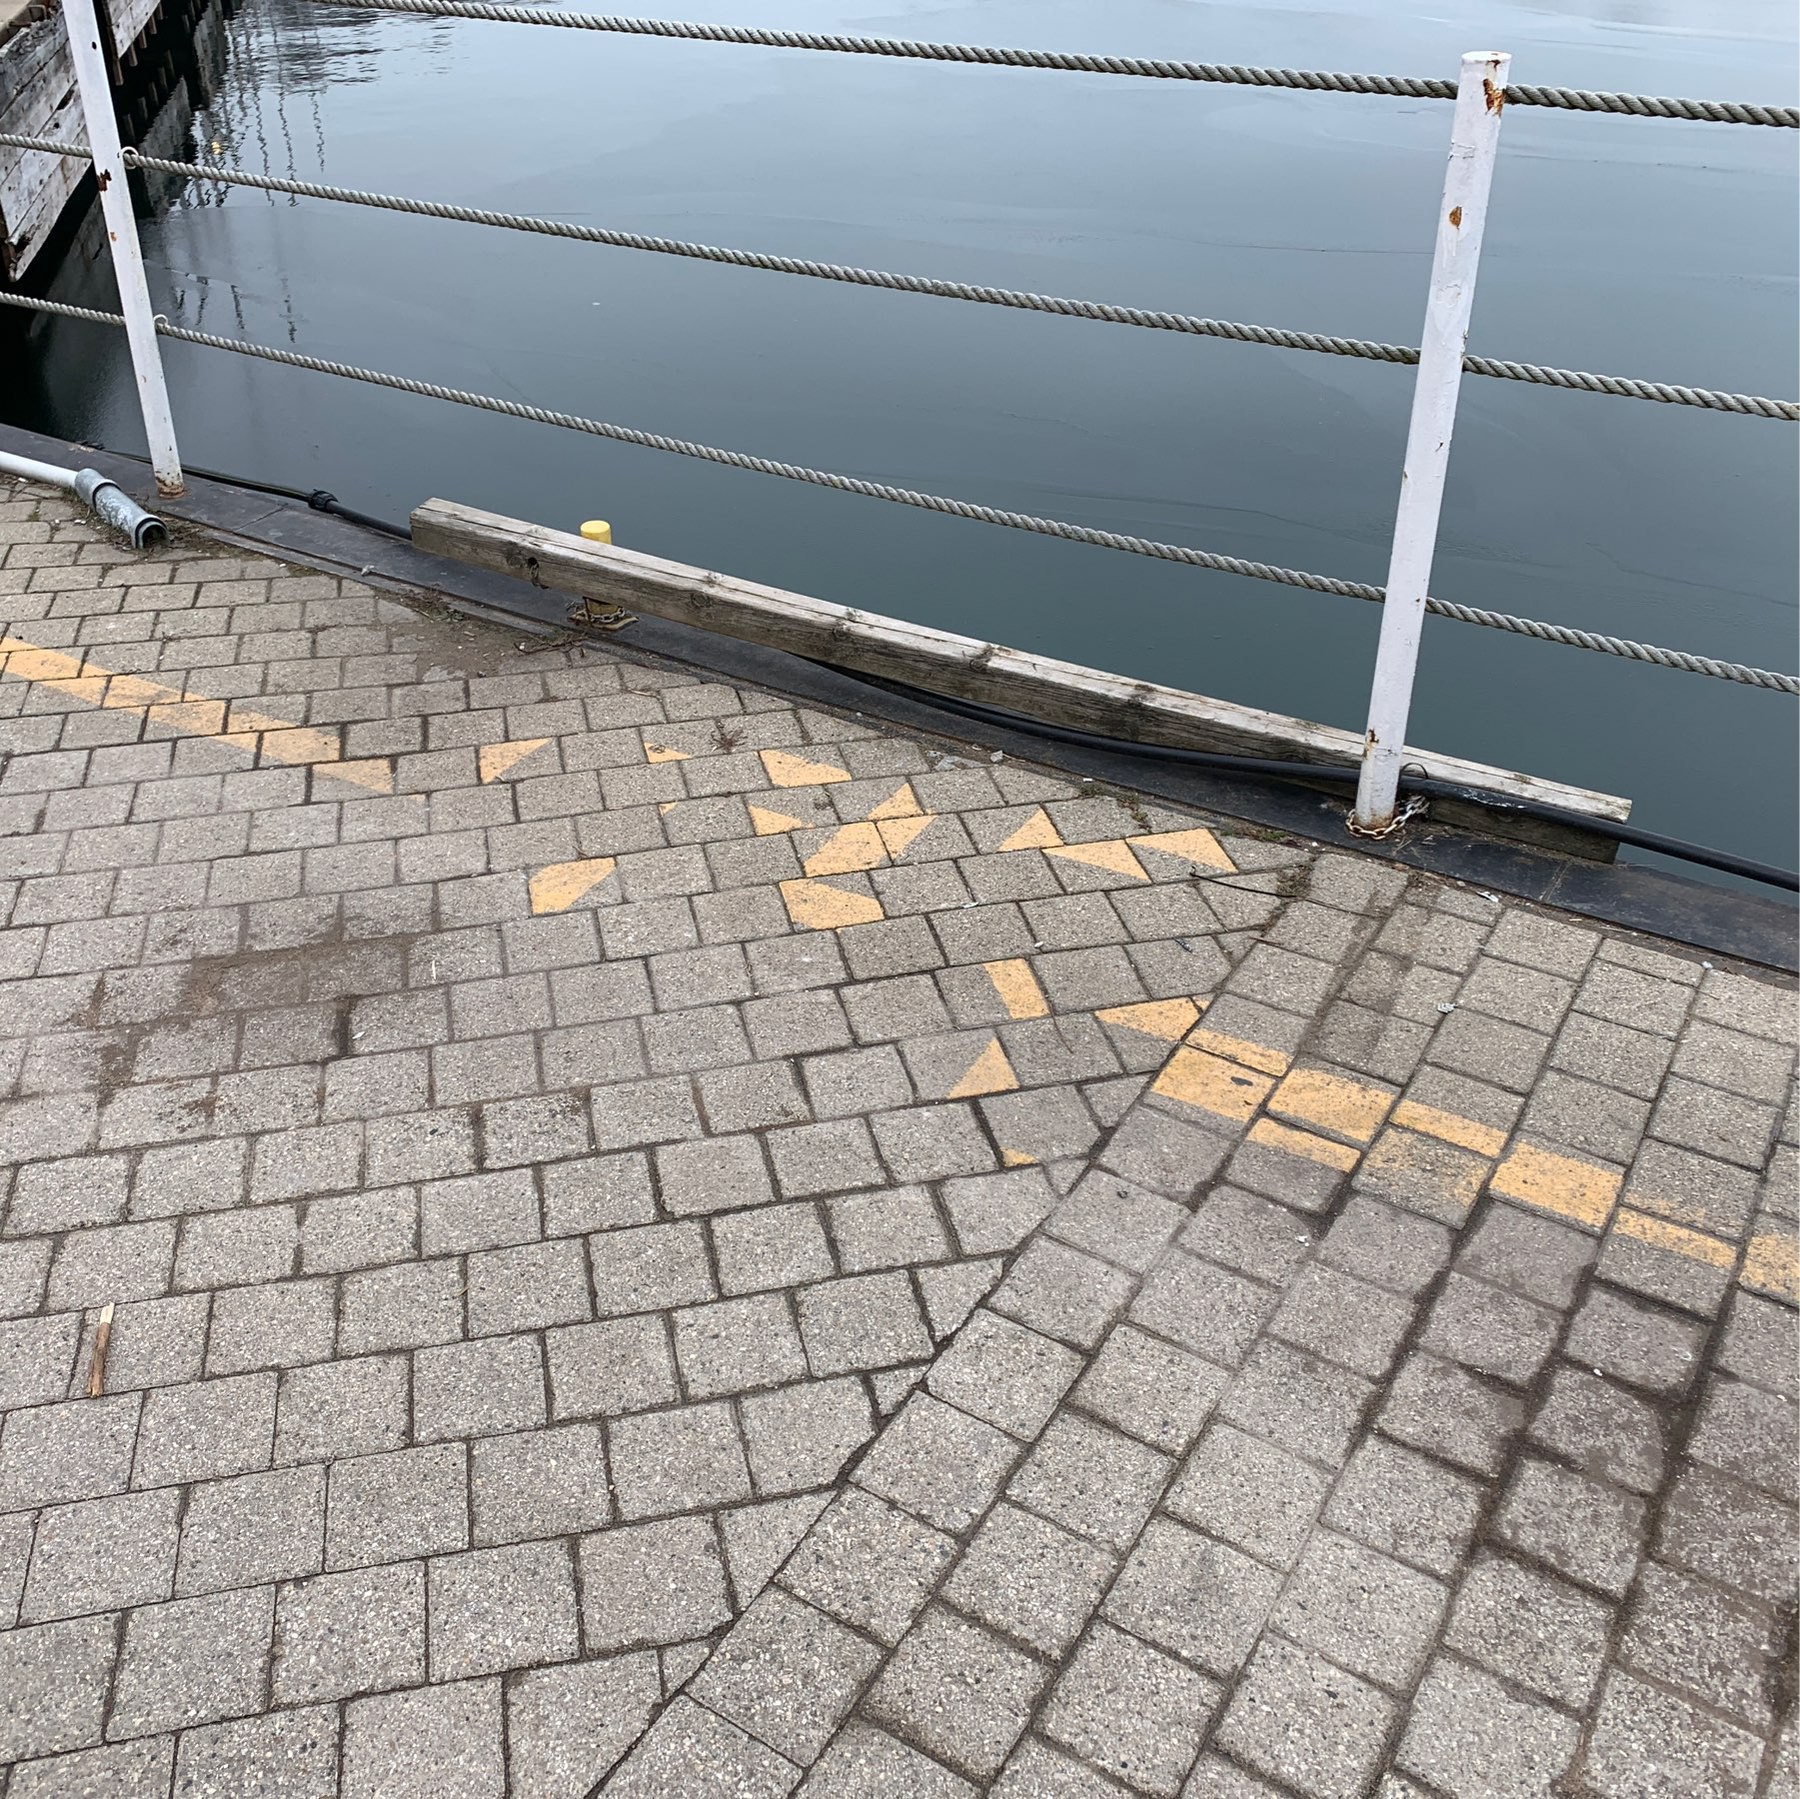 Pavment bricks at Ontario Place put back in a strange way.